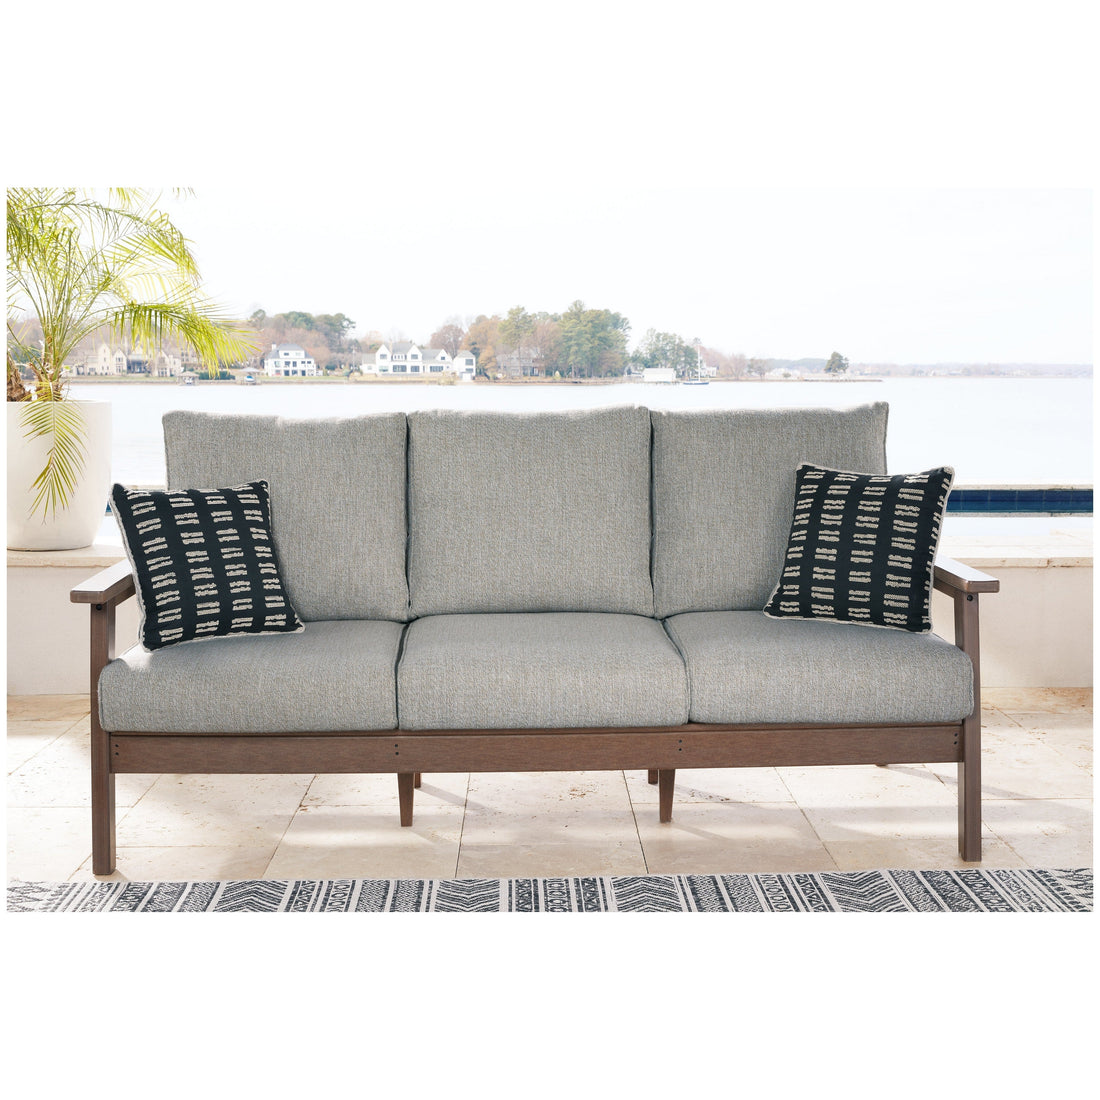 Emmeline Outdoor Sofa with Cushion Ash-P420-838